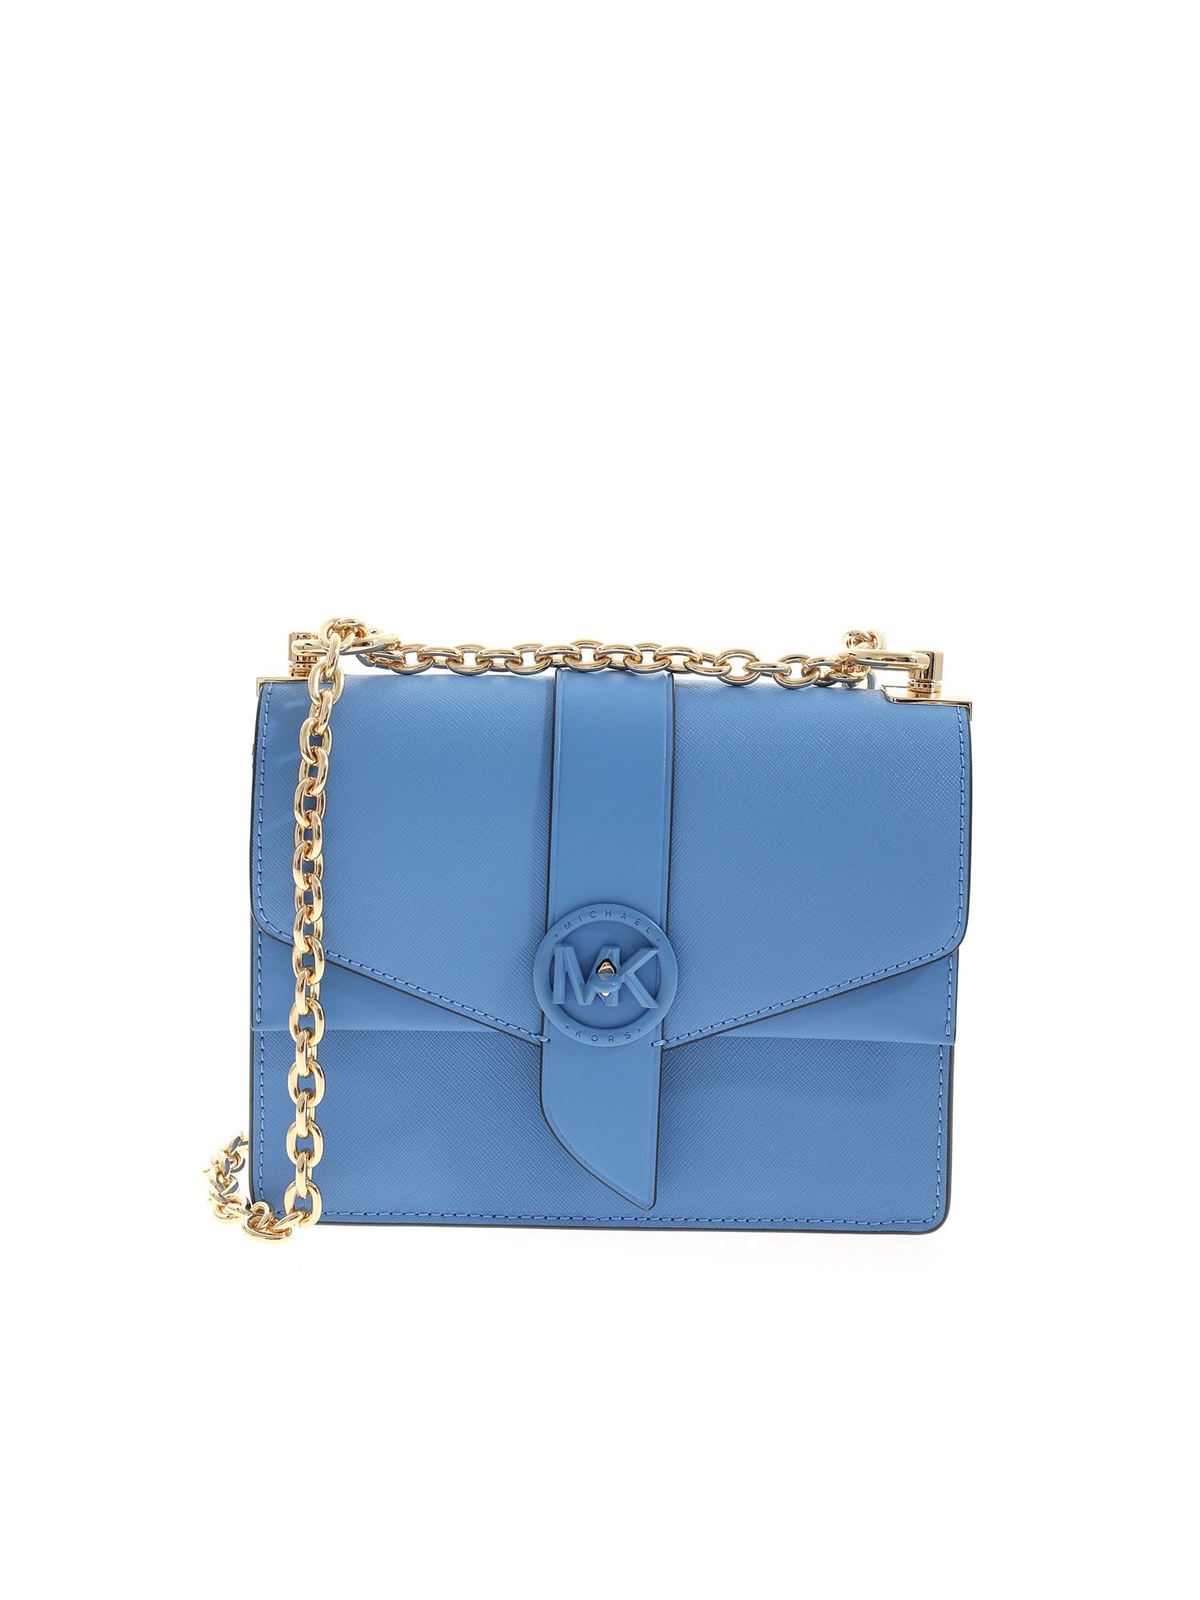 MICHAEL KORS Greenwich Crossbody Bag in Saffiano Leather Pacific